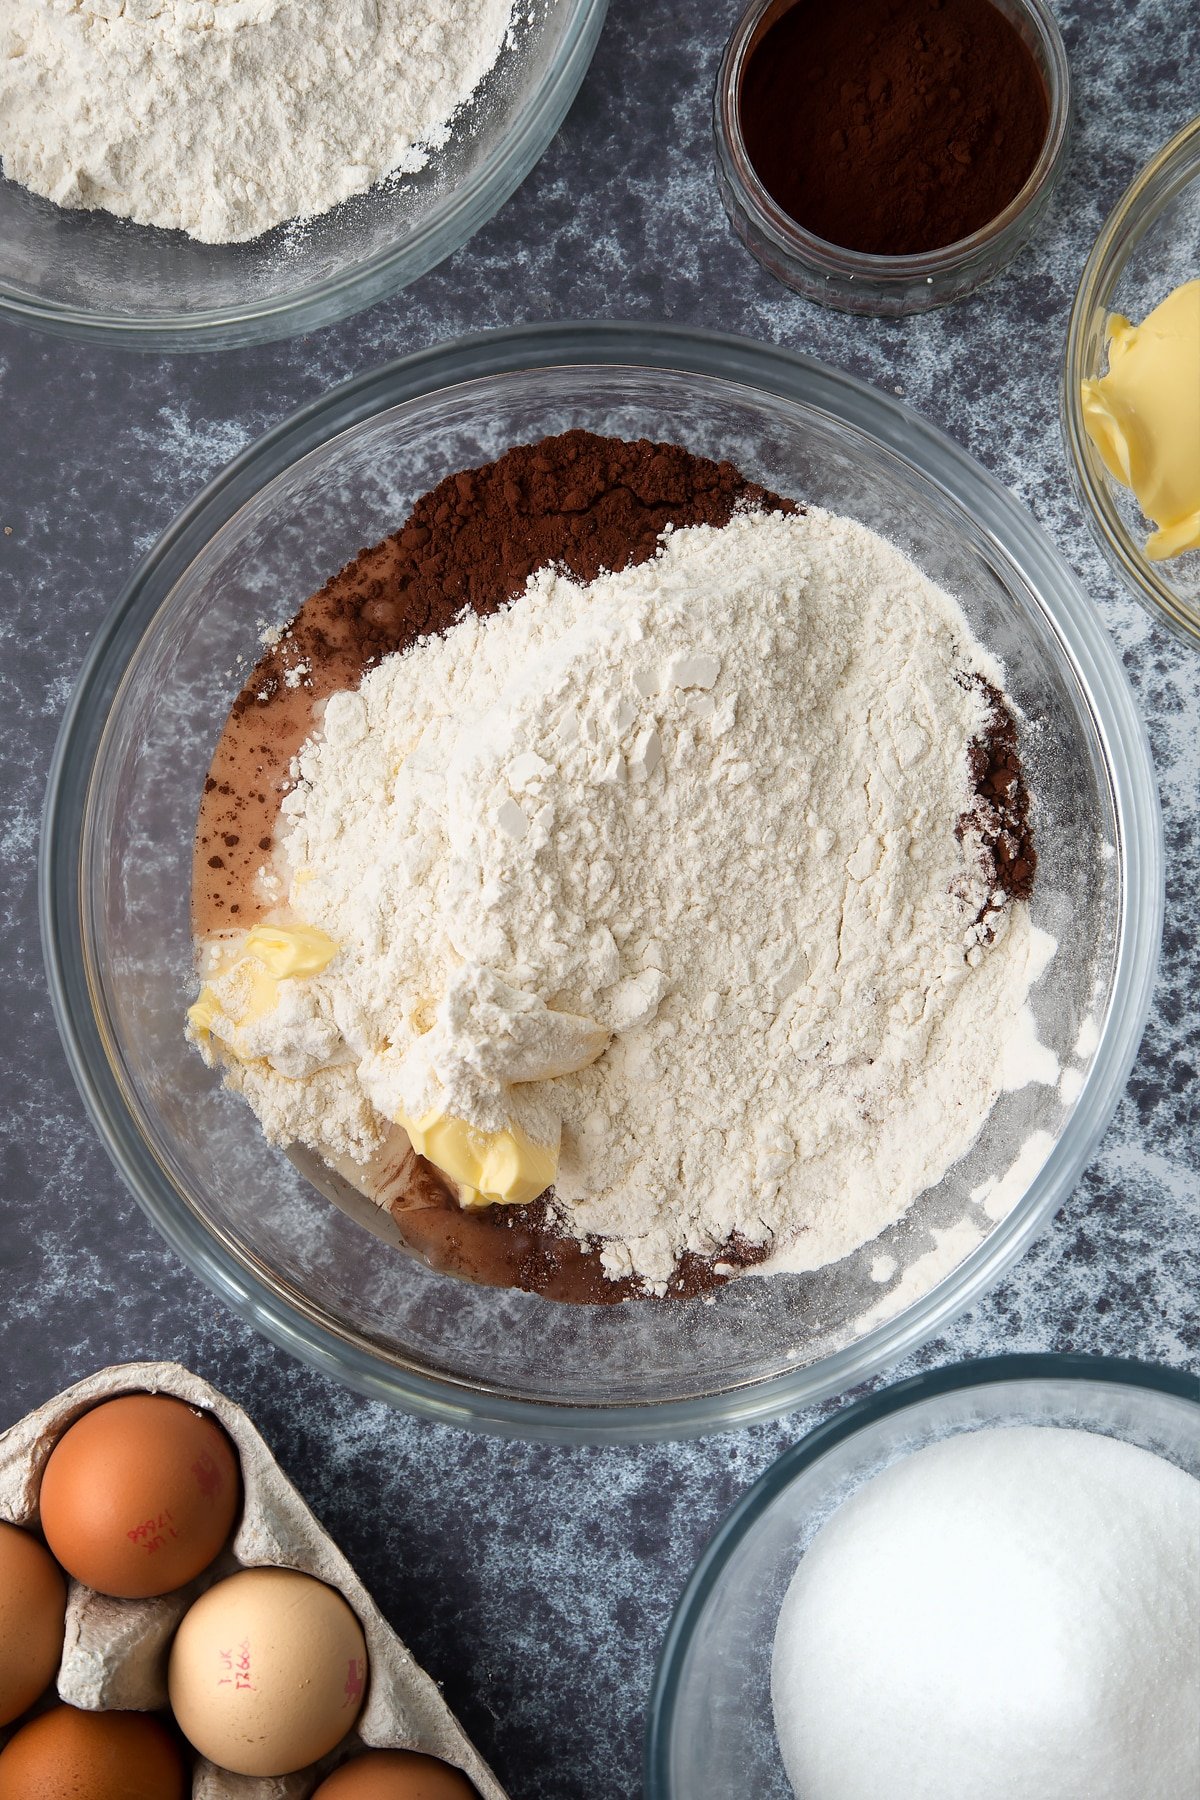 Margarine, oil, caster sugar, milk, cocoa, eggs and flour in a large mixing bowl. Ingredients to make slime cupcakes surround the bowl.